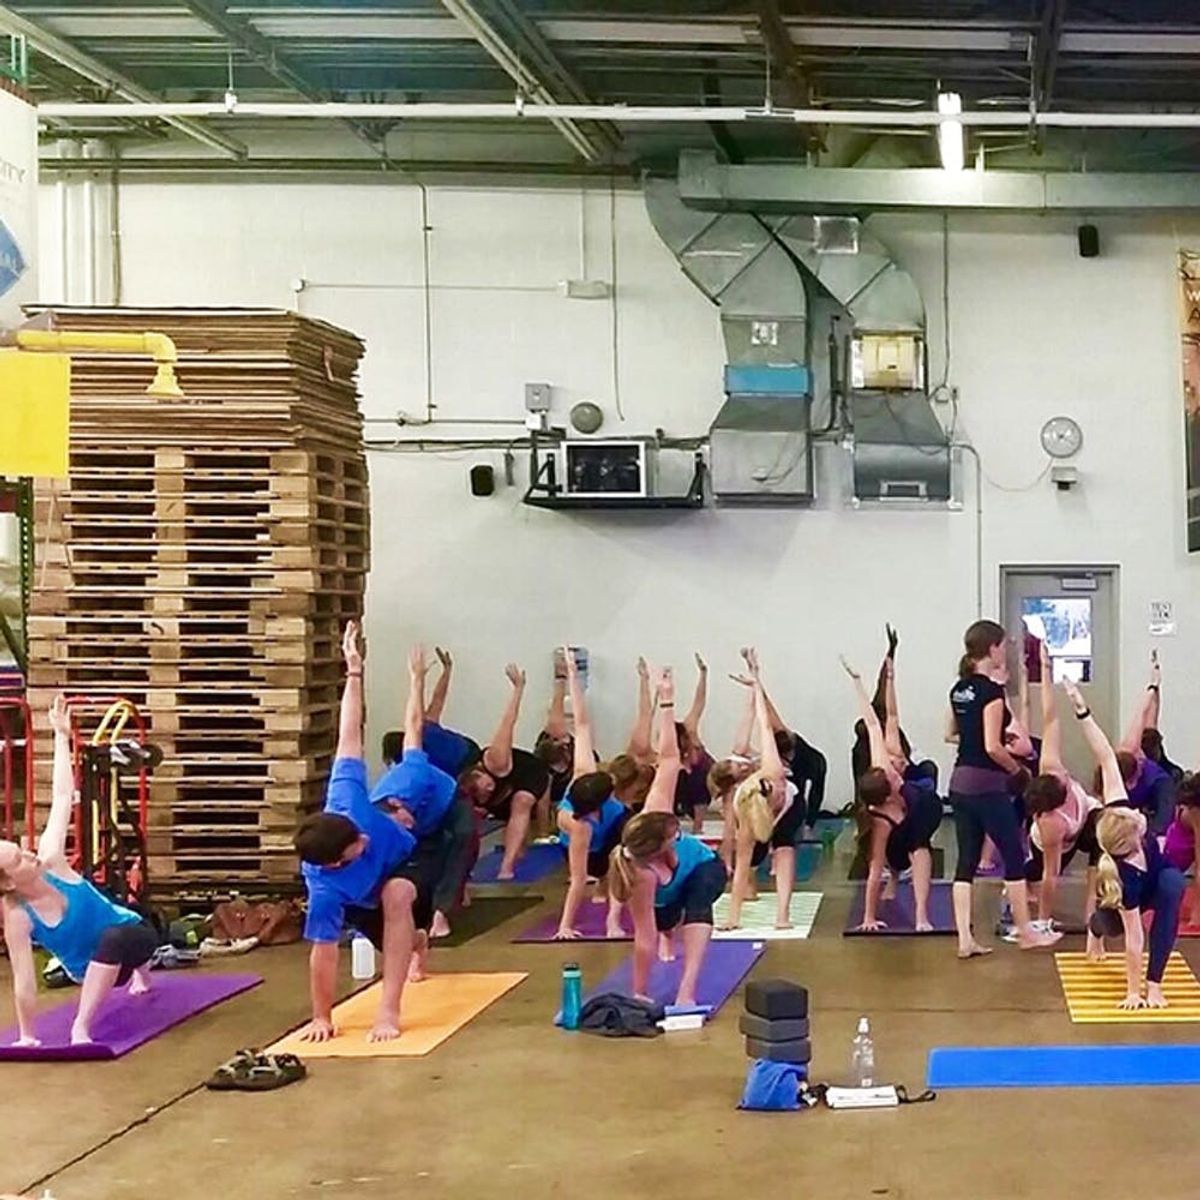 Why Beer + Yoga Could Be the Next Hot Fitness Trend